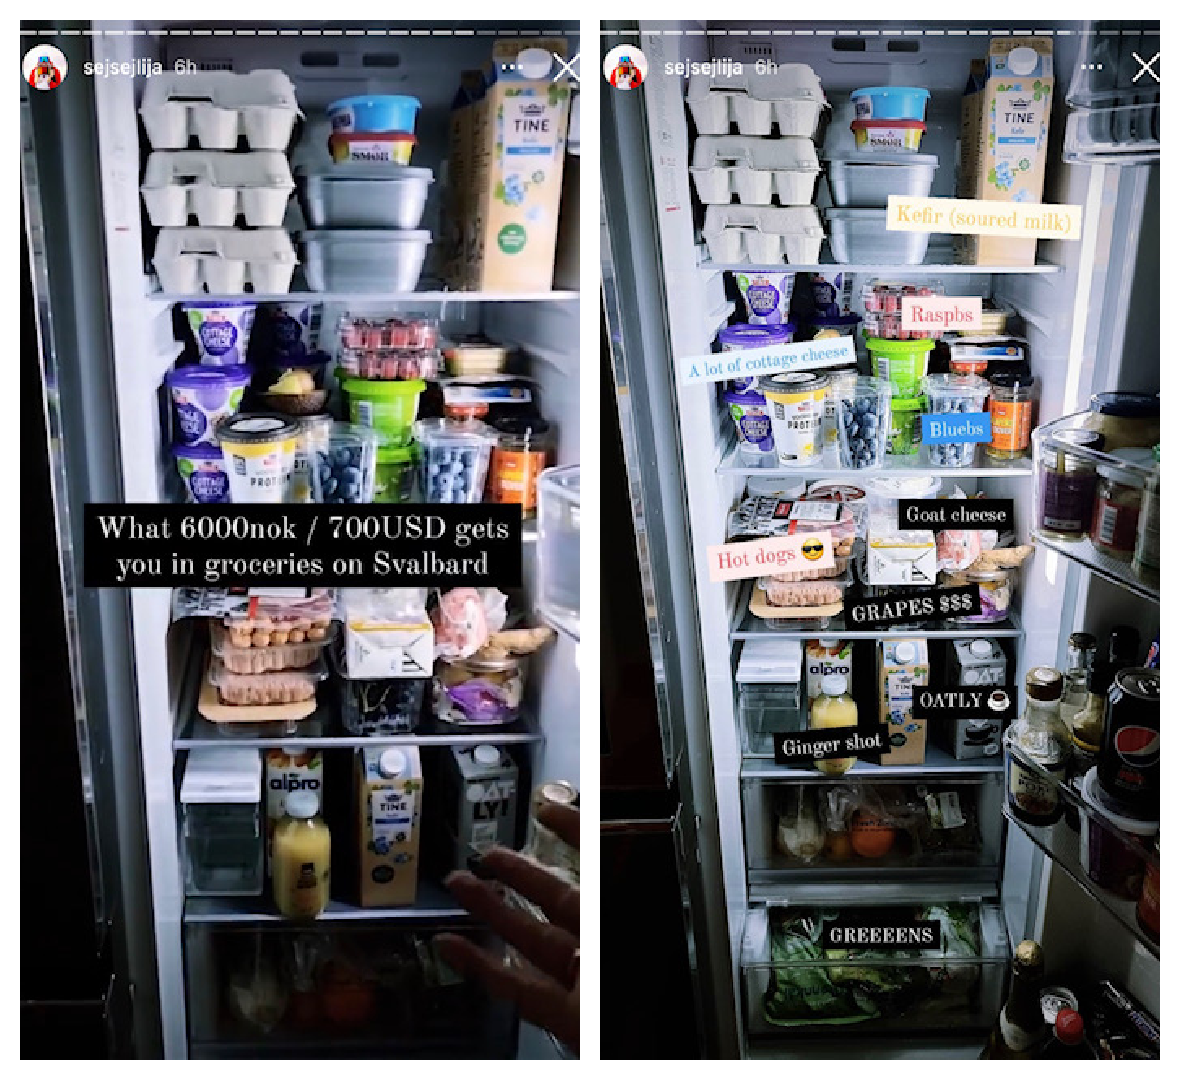 Bild på fullt kylskåp och texten: What 6000NOK/700USB gives you in groceries on Svalbard - and the an explanation on some of the things in the fridge